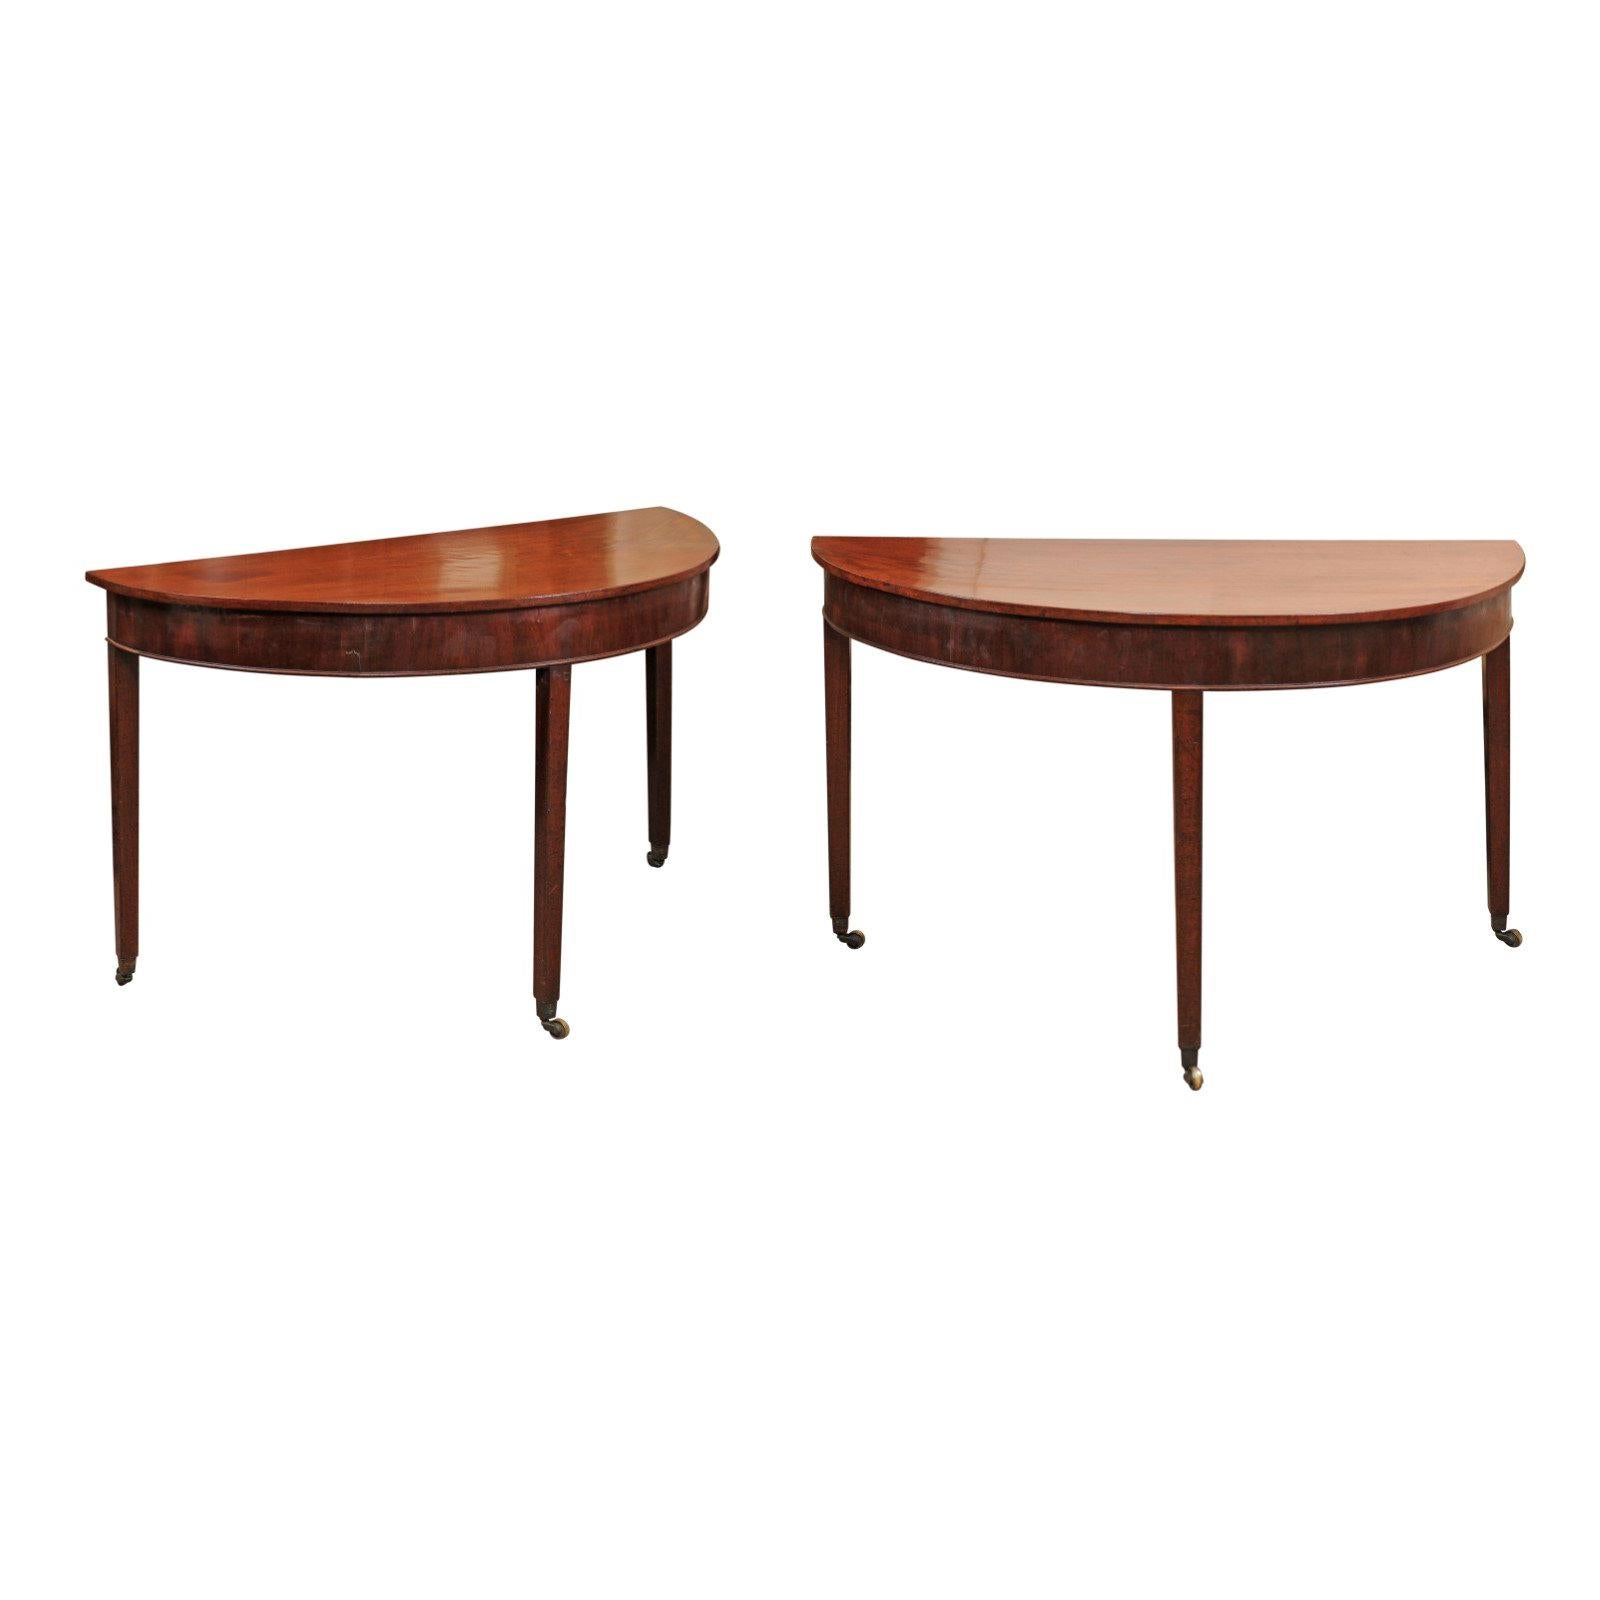 Pair of George III English Mahogany Demilune Console Tables, circa 1790